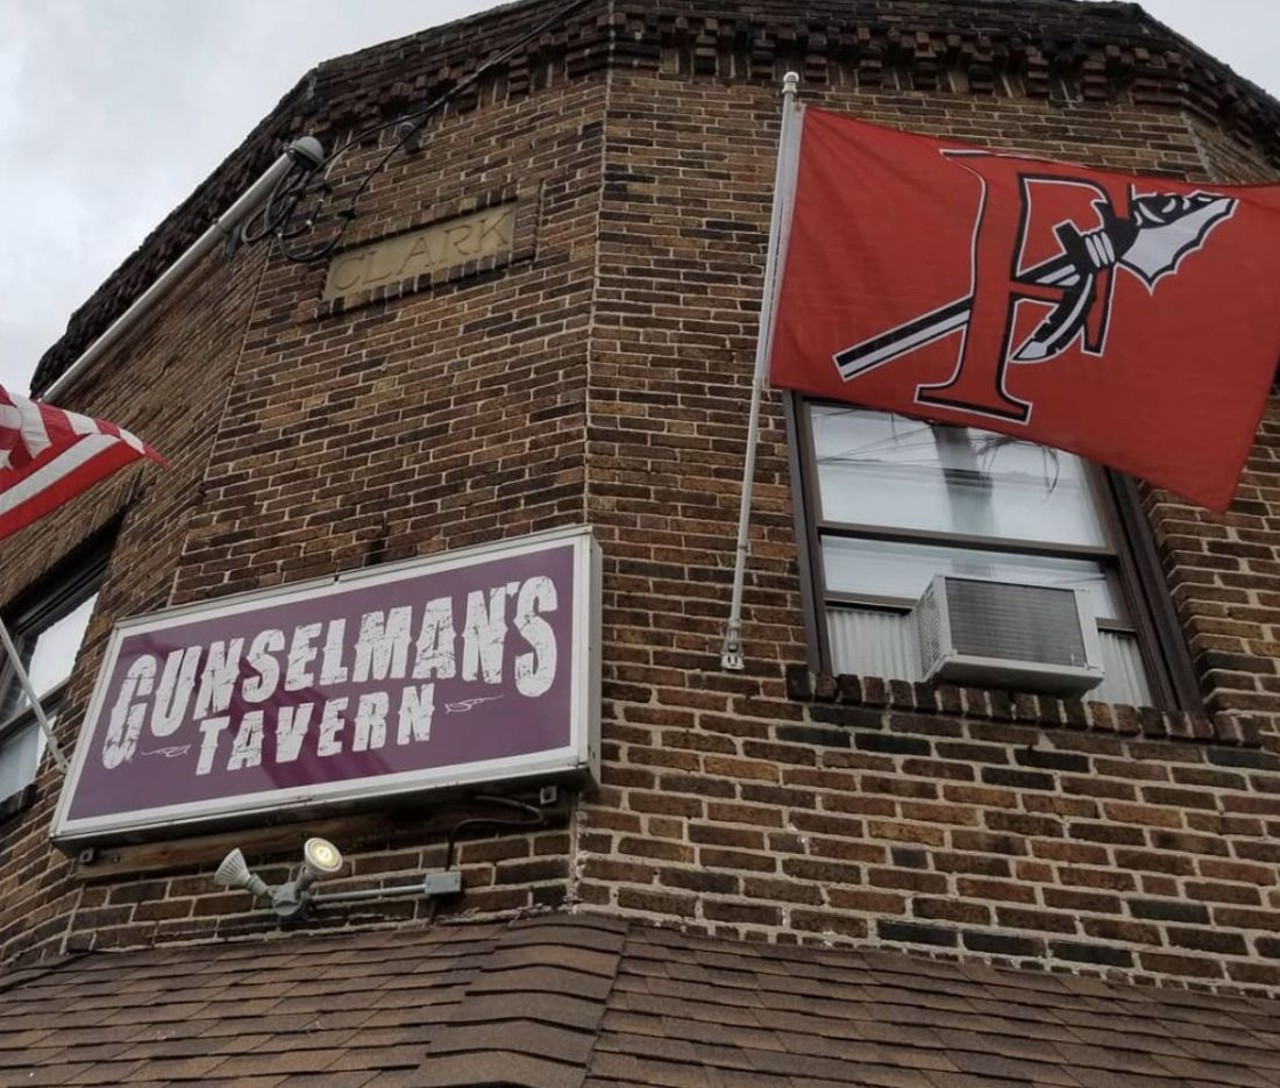  Gunselman&#146;s Tavern
21490 Lorain Ave., Fairview Park
Locally sourced and served on a cast-iron skillet, these burgers were recently voted the best in town. Gunselman&#146;s is an old-school joint that has been around since 1936. But they keep up with the times. For something special, try the Cleveland Handshake - a burger topped with Ohio City Pasta pierogi, Cleveland Kraut, Bertman&#146;s Dortmunder mustard and Cleveland Pickle&#146;s onion jam, a smorgasbord of ingredients from local businesses.
Photo via @GunselmansTavern/Instagram